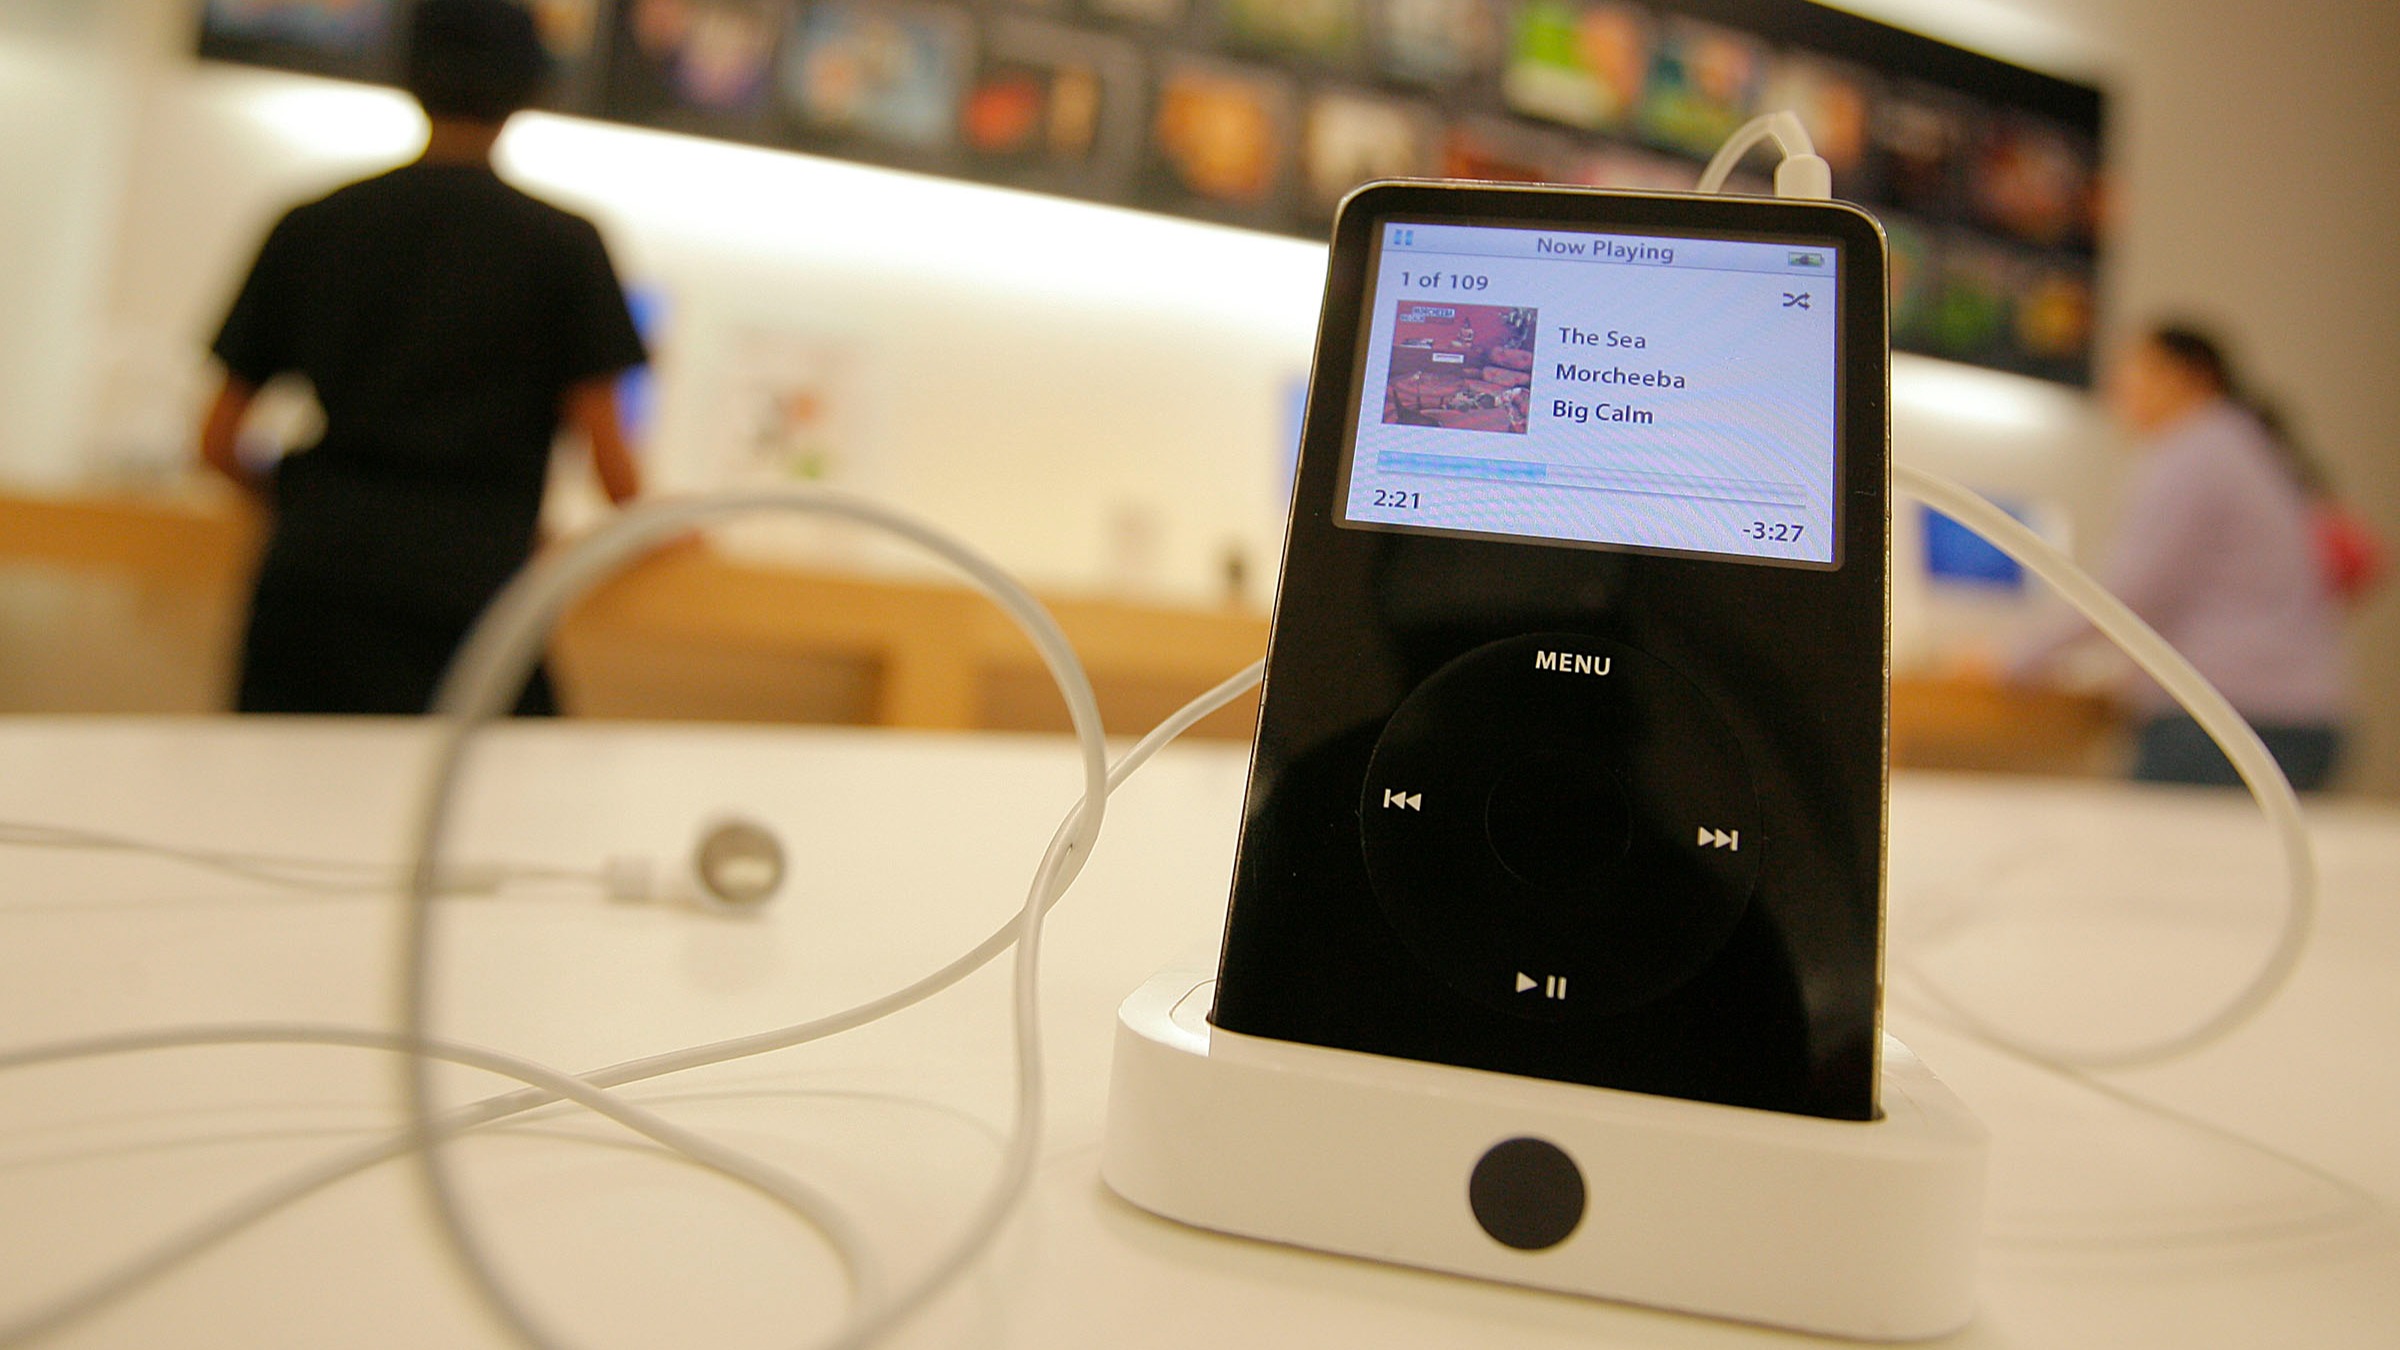 Apple discontinues the revolutionary iPod music player